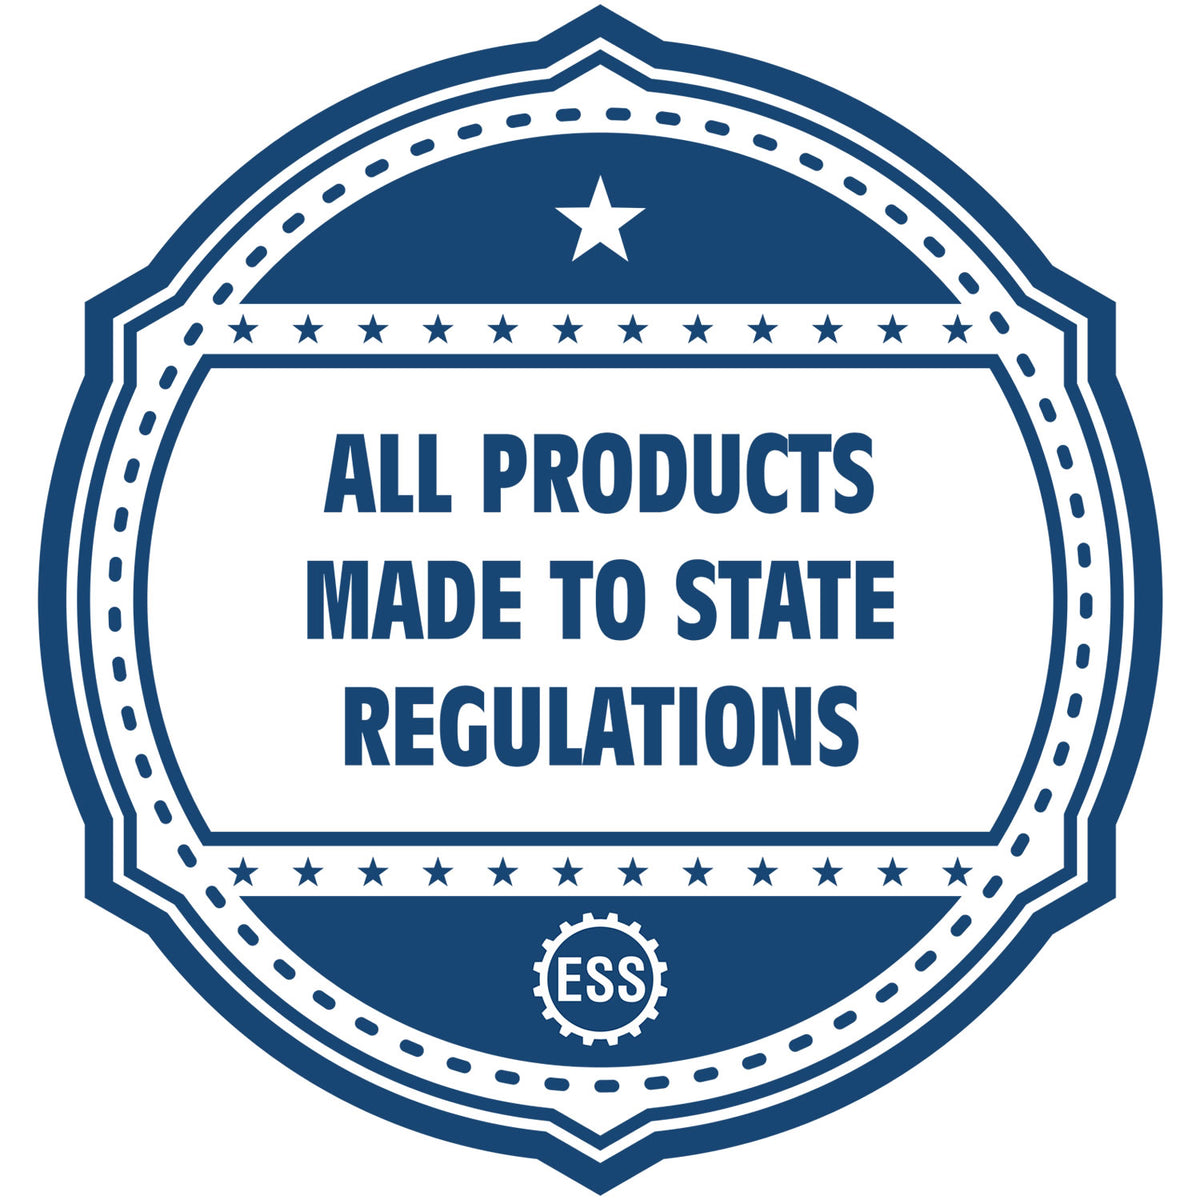 An icon or badge element for the Premium MaxLight Pre-Inked Louisiana Engineering Stamp showing that this product is made in compliance with state regulations.